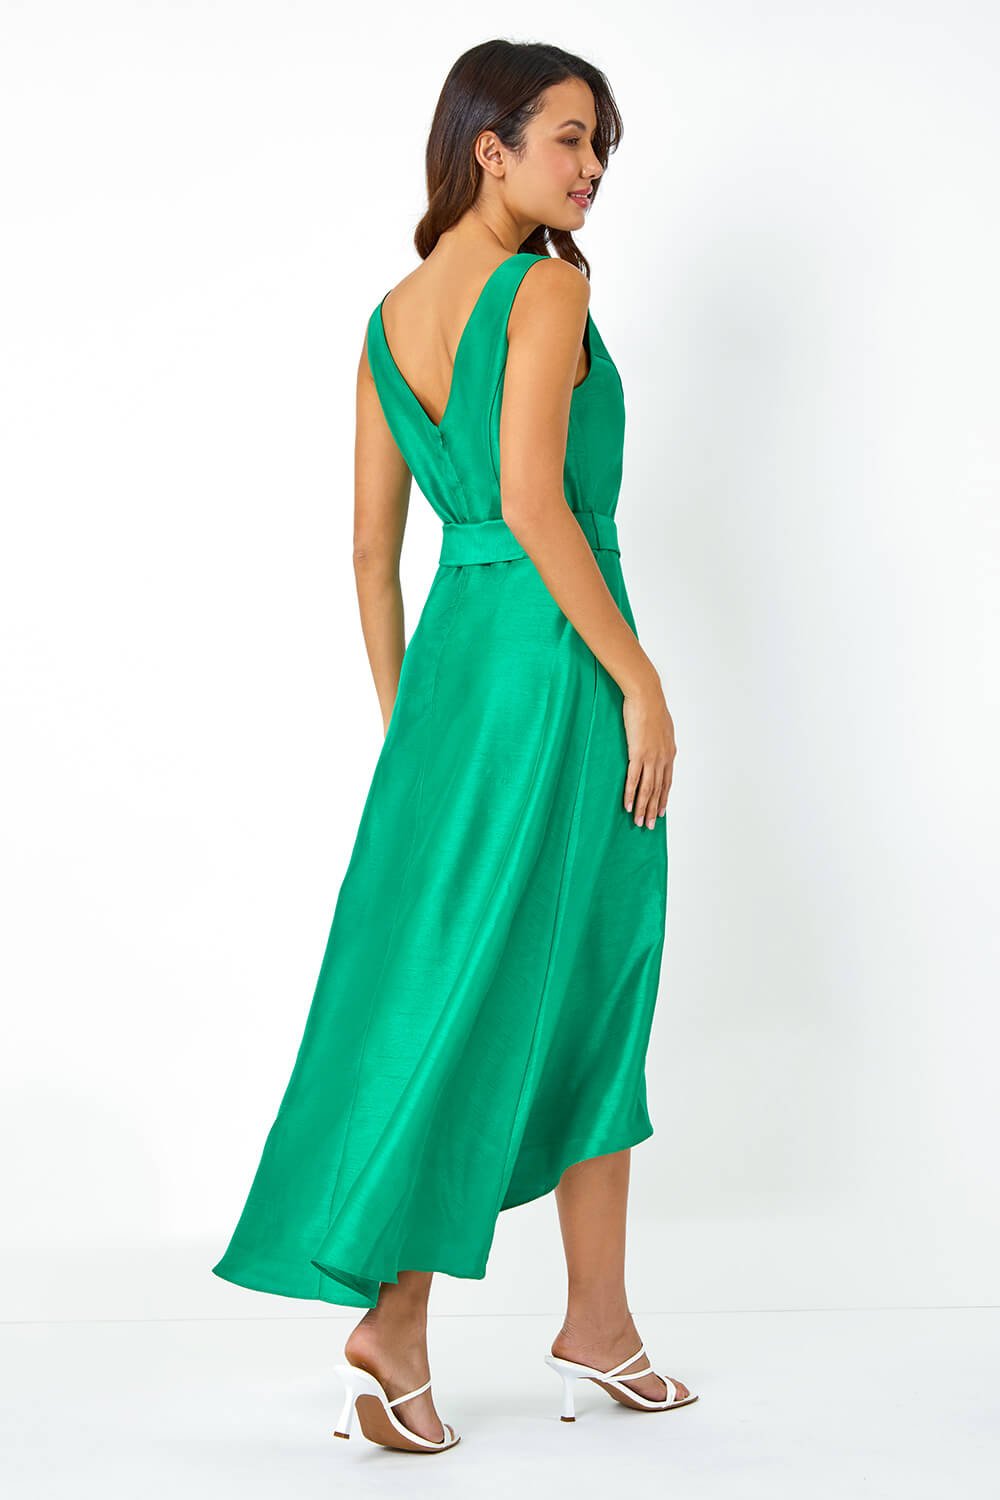 Green Dipped Hem Fit & Flare Dress, Image 3 of 5